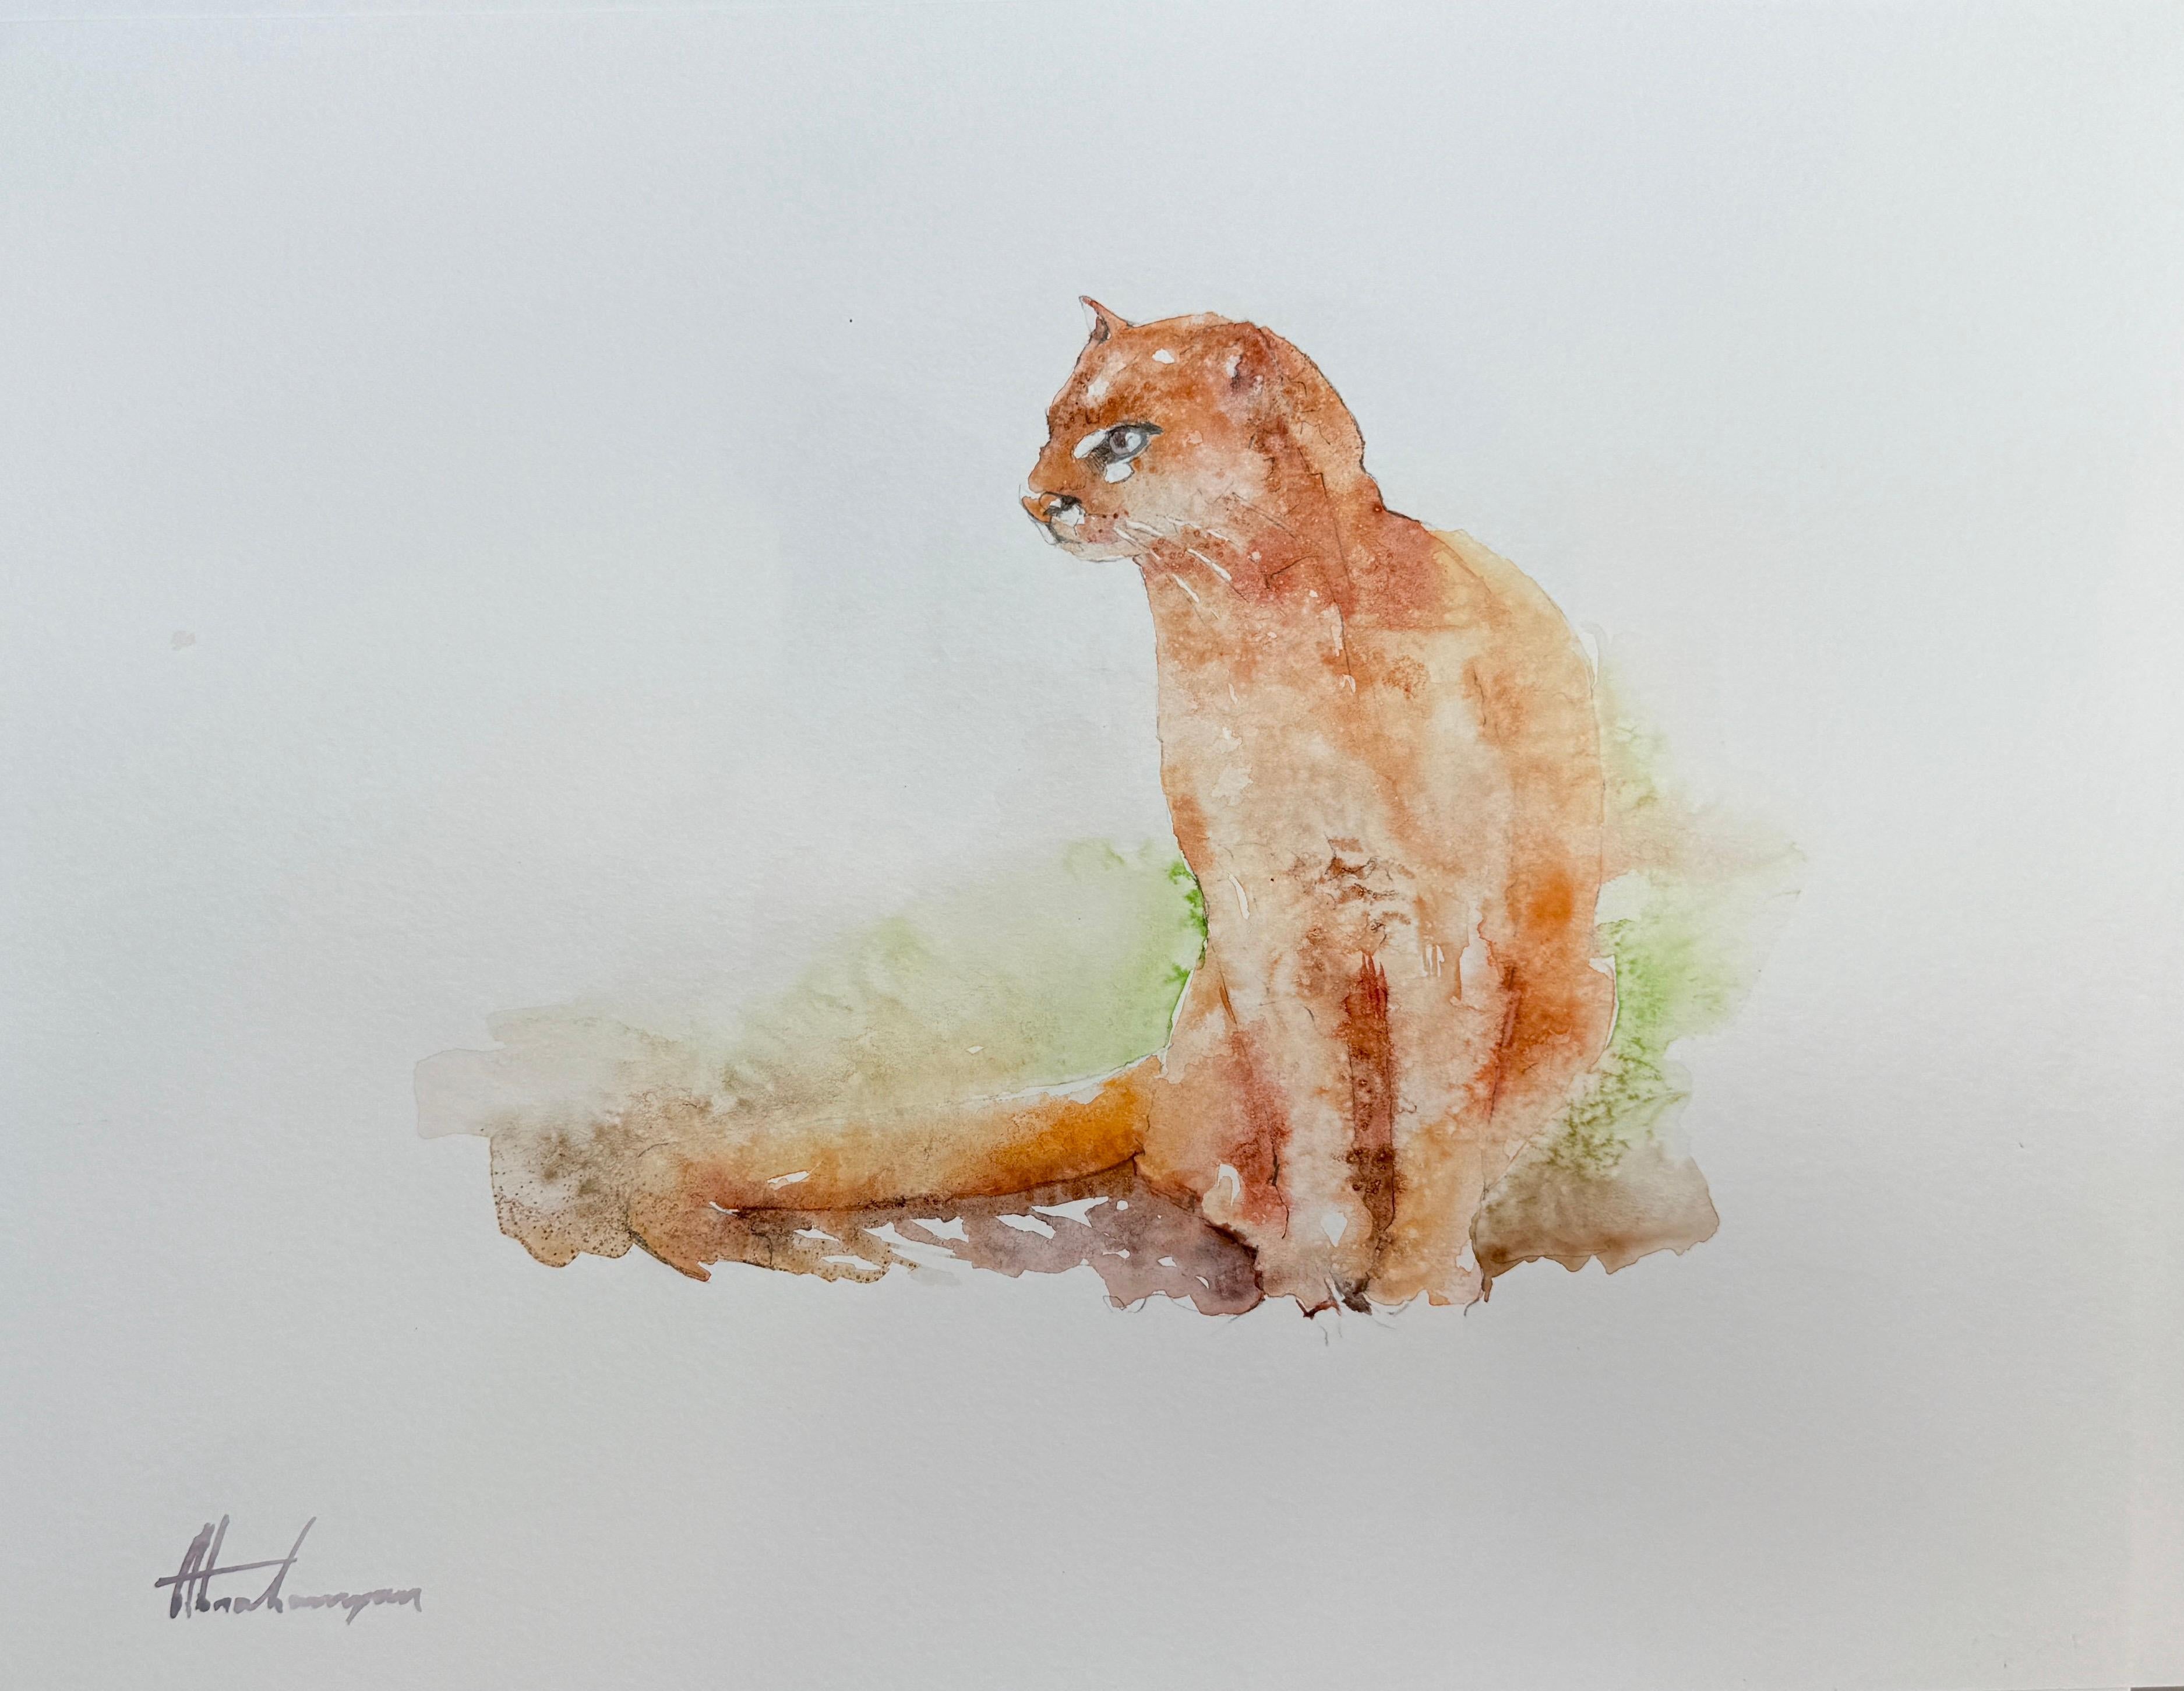 Puma, Animal, Watercolor on Paper, Handmade Painting, One of a Kind